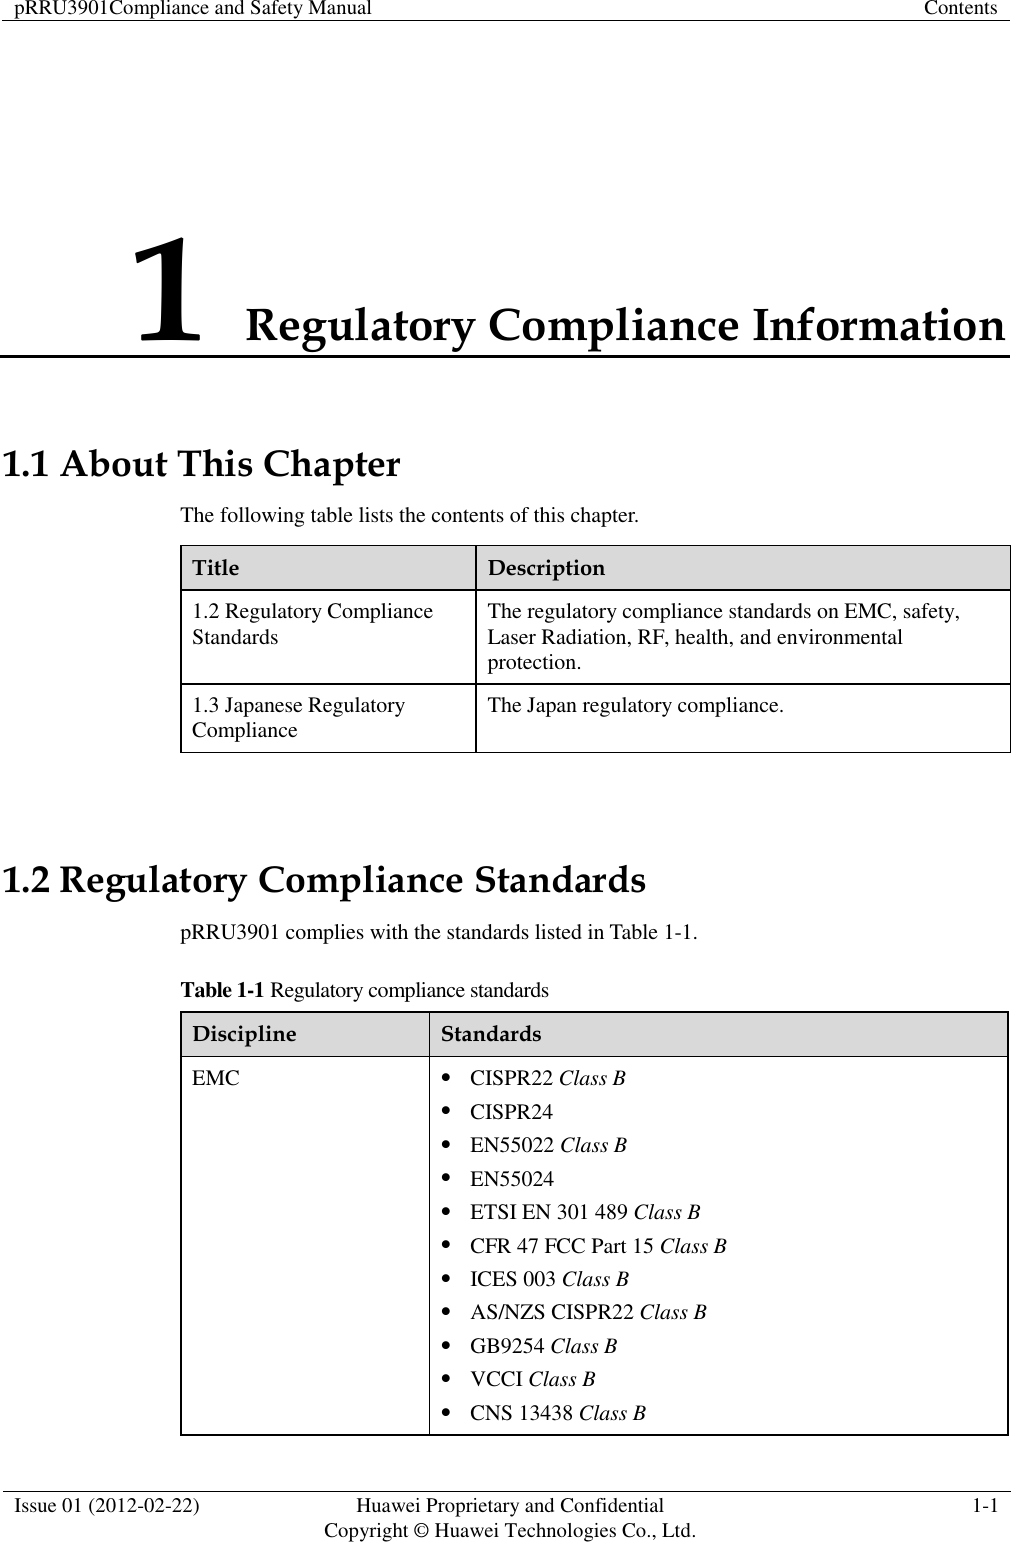 pRRU3901Compliance and Safety Manual Contents  Issue 01 (2012-02-22) Huawei Proprietary and Confidential           Copyright © Huawei Technologies Co., Ltd. 1-1  1 Regulatory Compliance Information 1.1 About This Chapter The following table lists the contents of this chapter. Title Description 1.2 Regulatory Compliance Standards The regulatory compliance standards on EMC, safety, Laser Radiation, RF, health, and environmental protection. 1.3 Japanese Regulatory Compliance   The Japan regulatory compliance.  1.2 Regulatory Compliance Standards pRRU3901 complies with the standards listed in Table 1-1. Table 1-1 Regulatory compliance standards Discipline Standards EMC  CISPR22 Class B  CISPR24  EN55022 Class B  EN55024  ETSI EN 301 489 Class B  CFR 47 FCC Part 15 Class B  ICES 003 Class B  AS/NZS CISPR22 Class B  GB9254 Class B  VCCI Class B  CNS 13438 Class B 